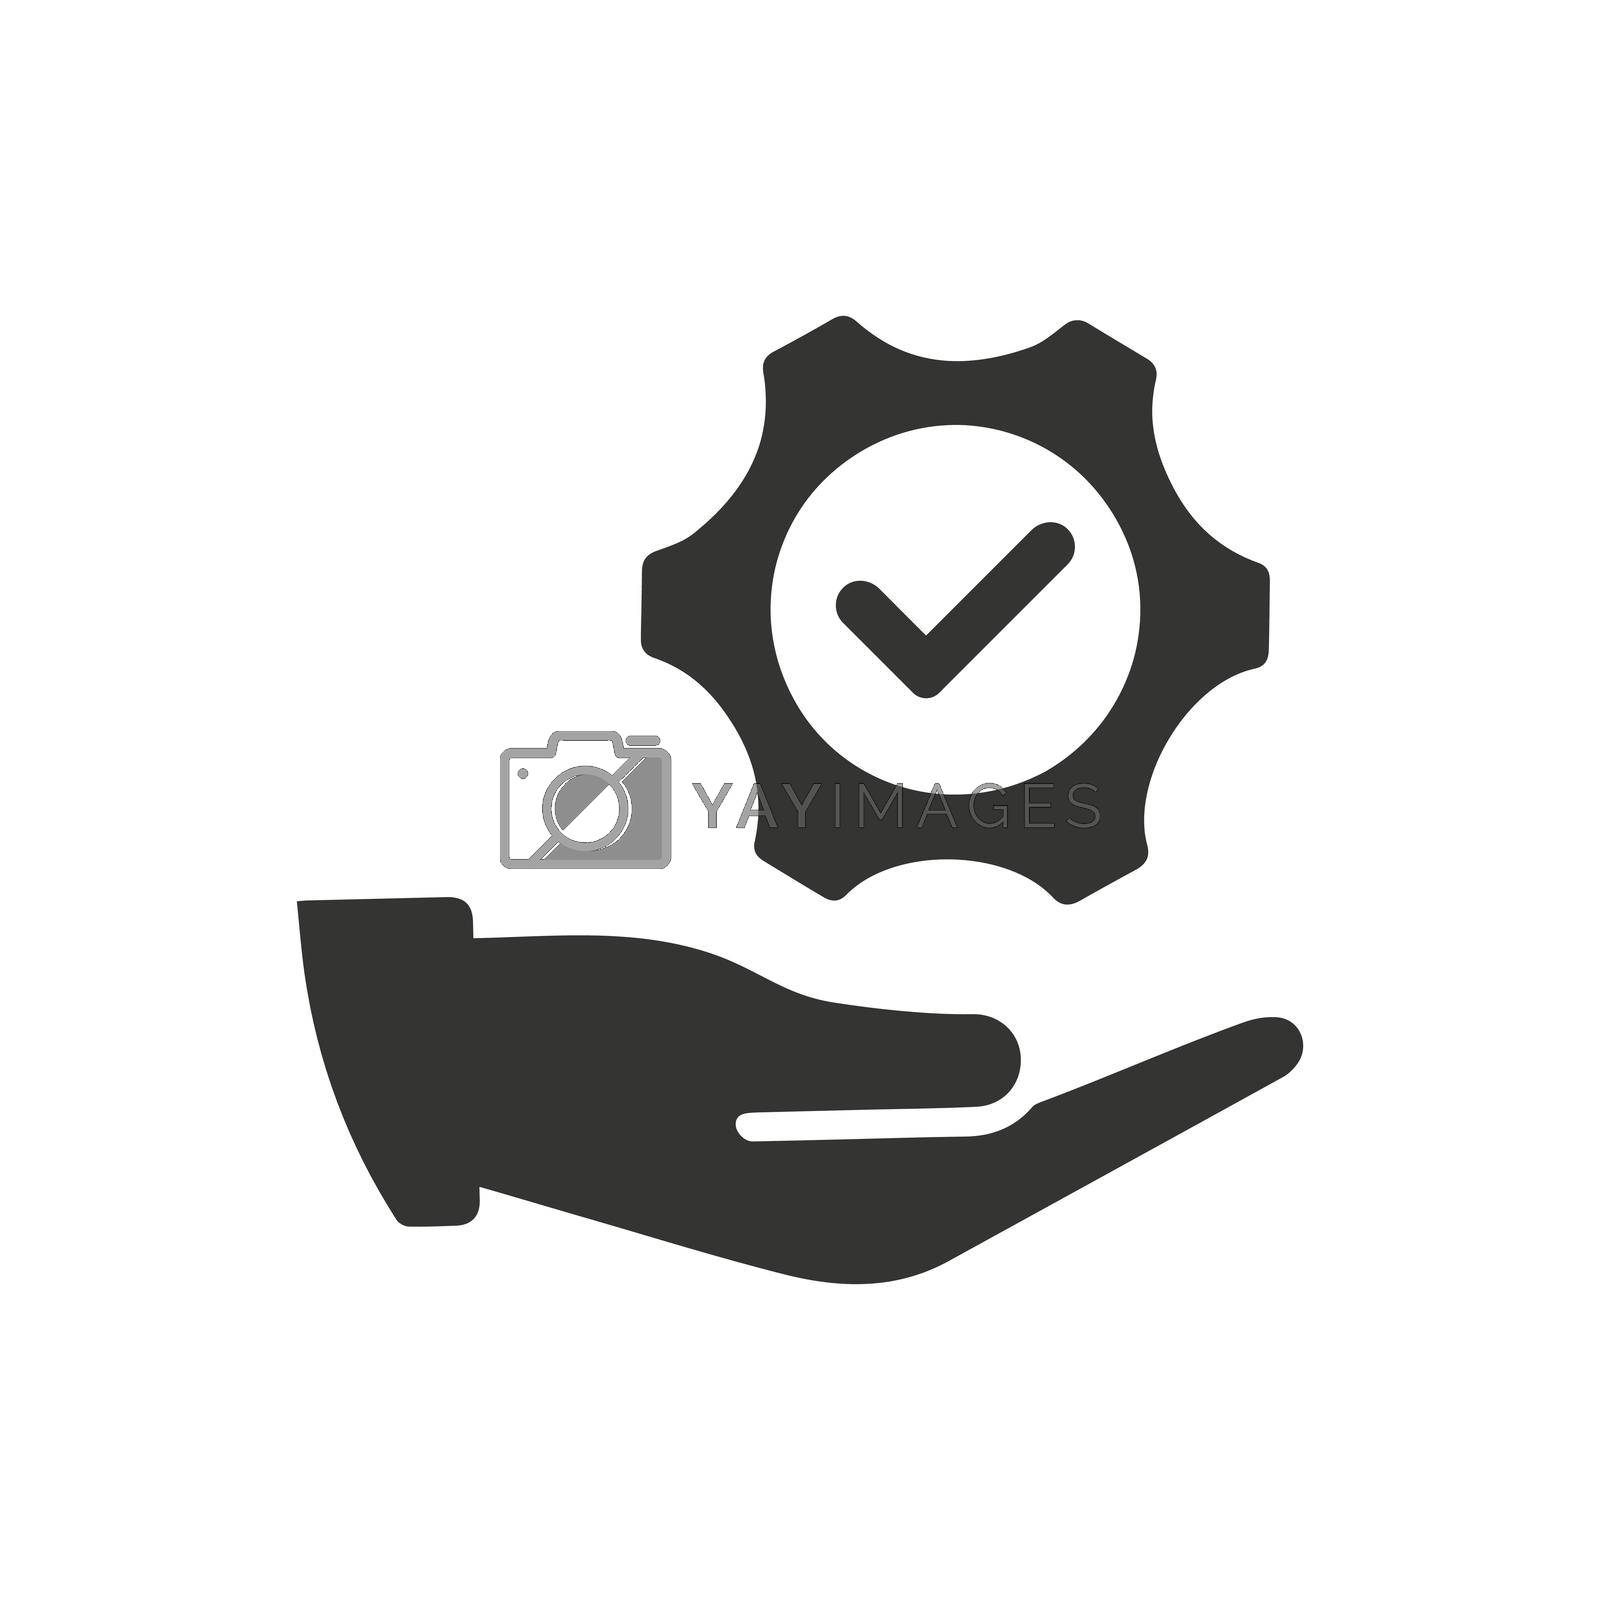 Royalty free image of Solution, Service Icon by delwar018